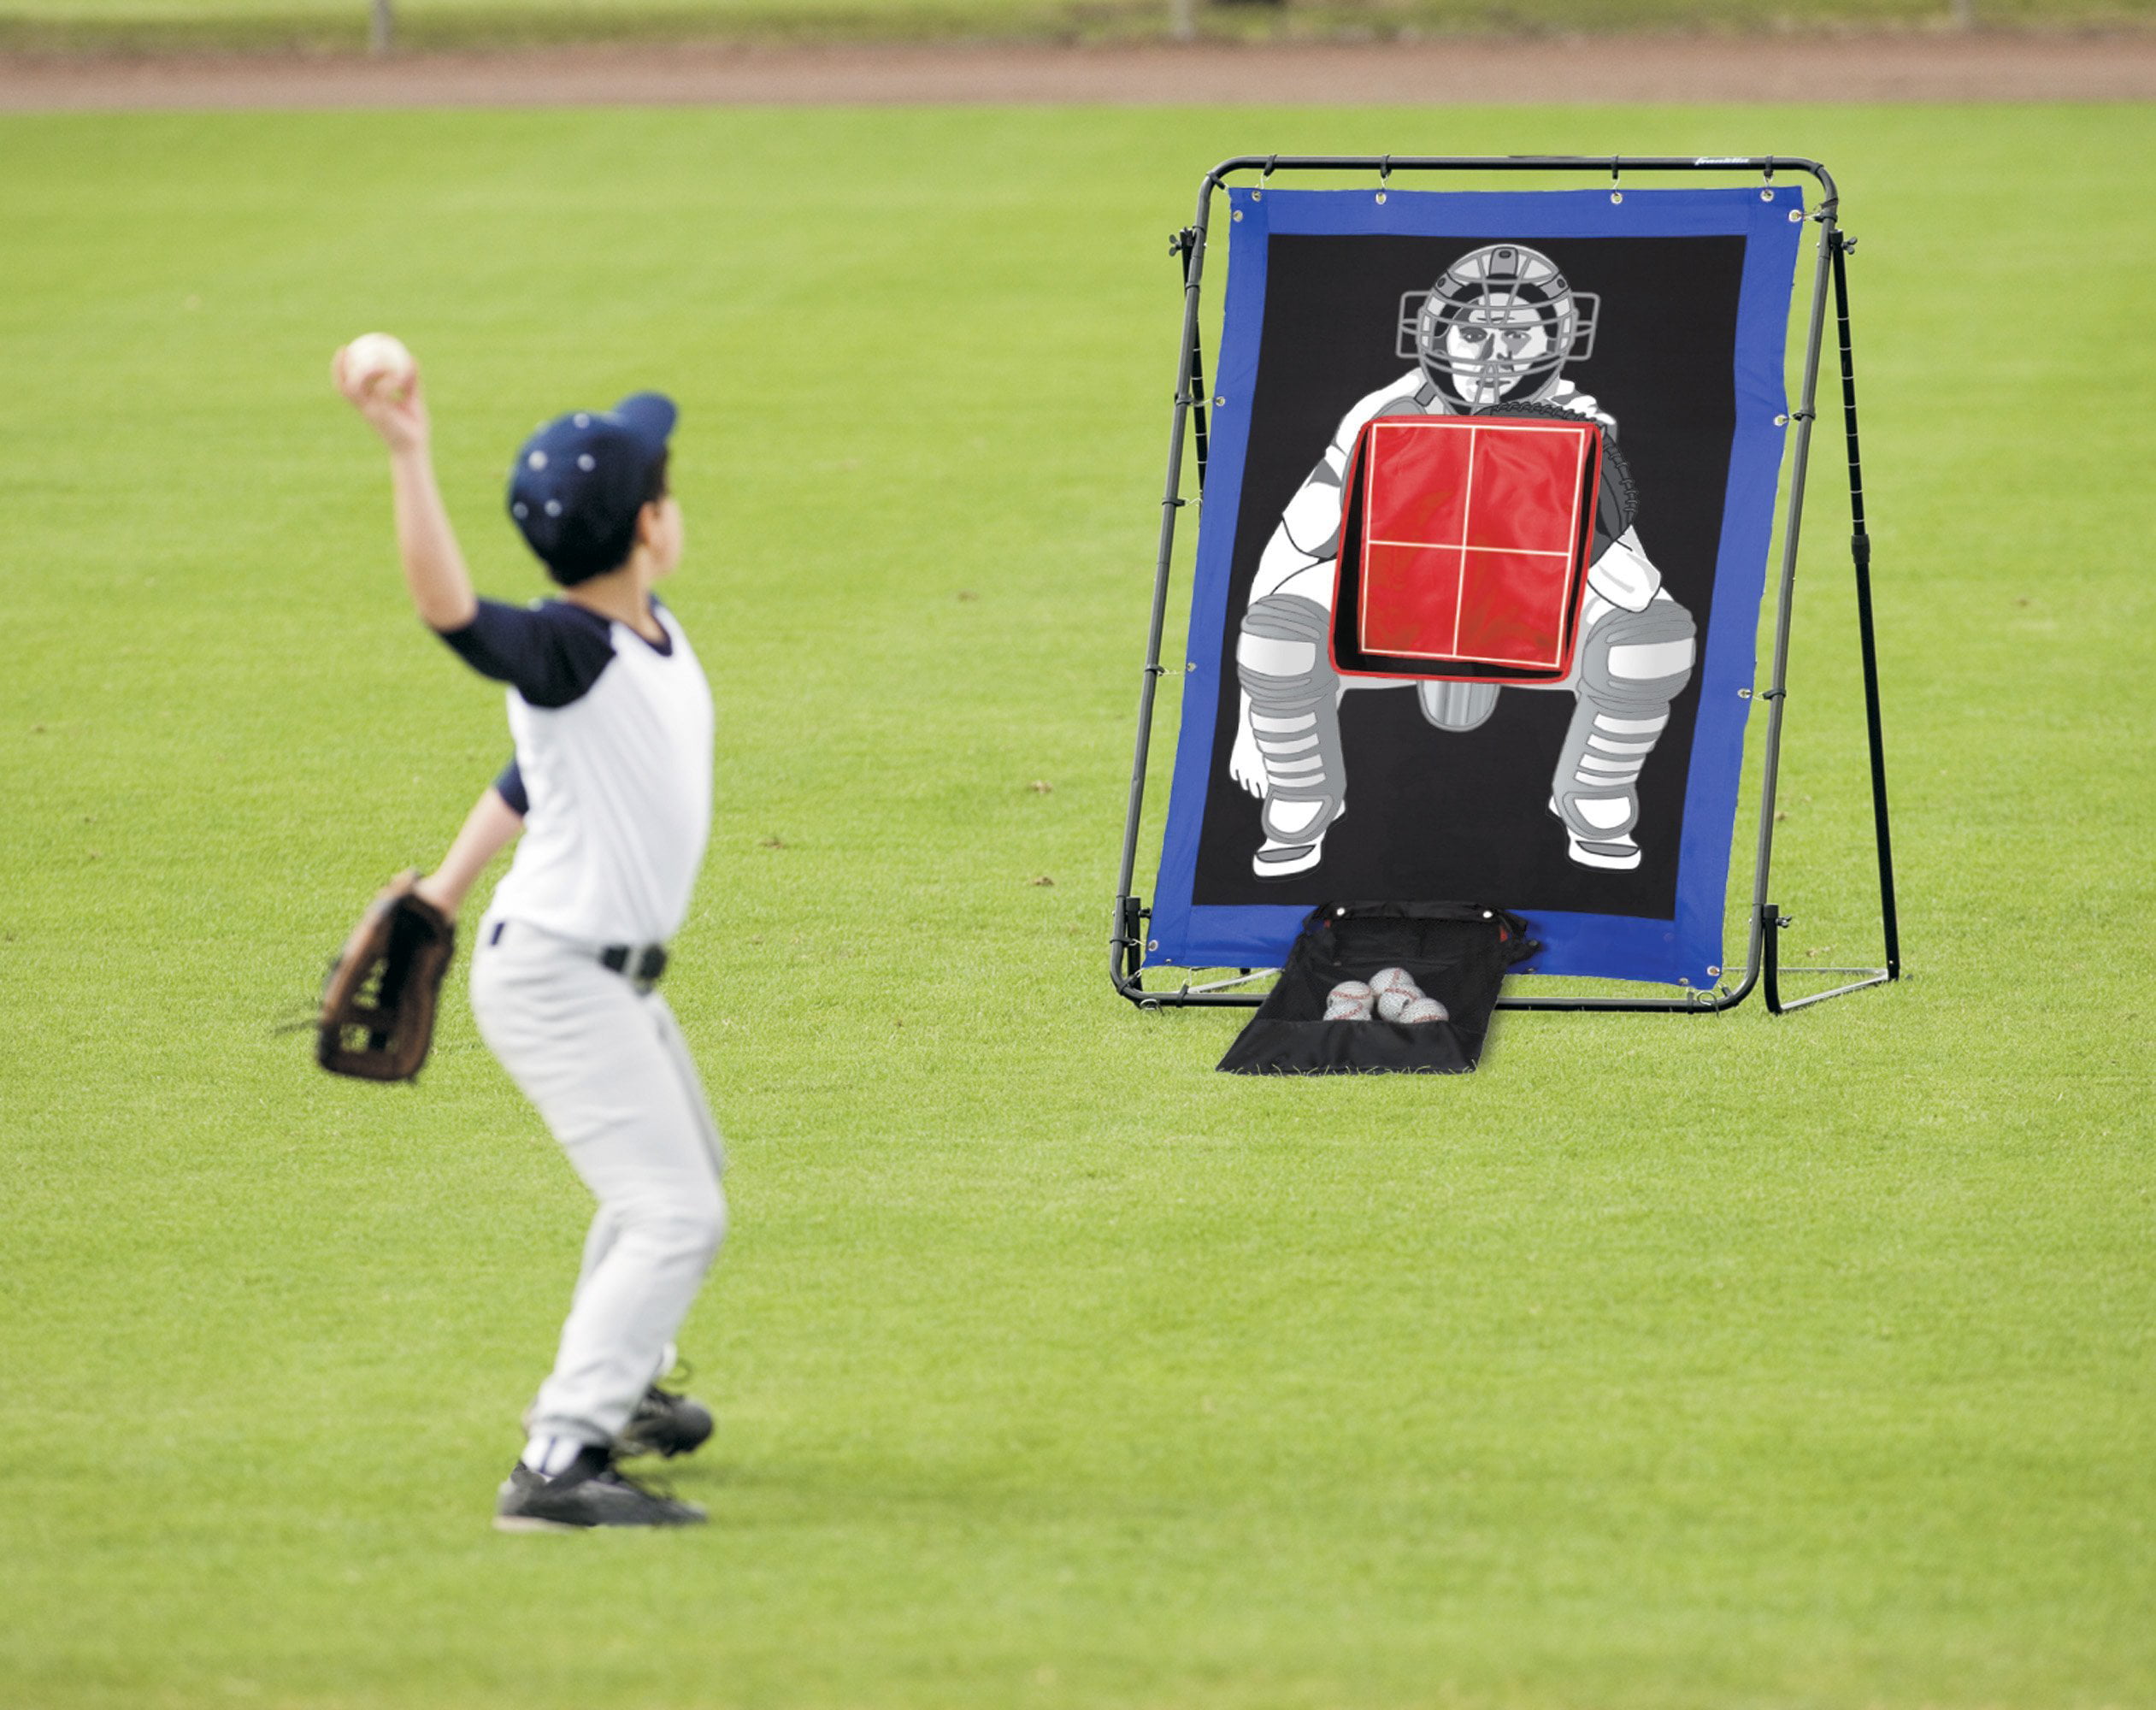 Baseball Pitch Back Pitching Net Target Practice Training Aid Outdoor Equipment 